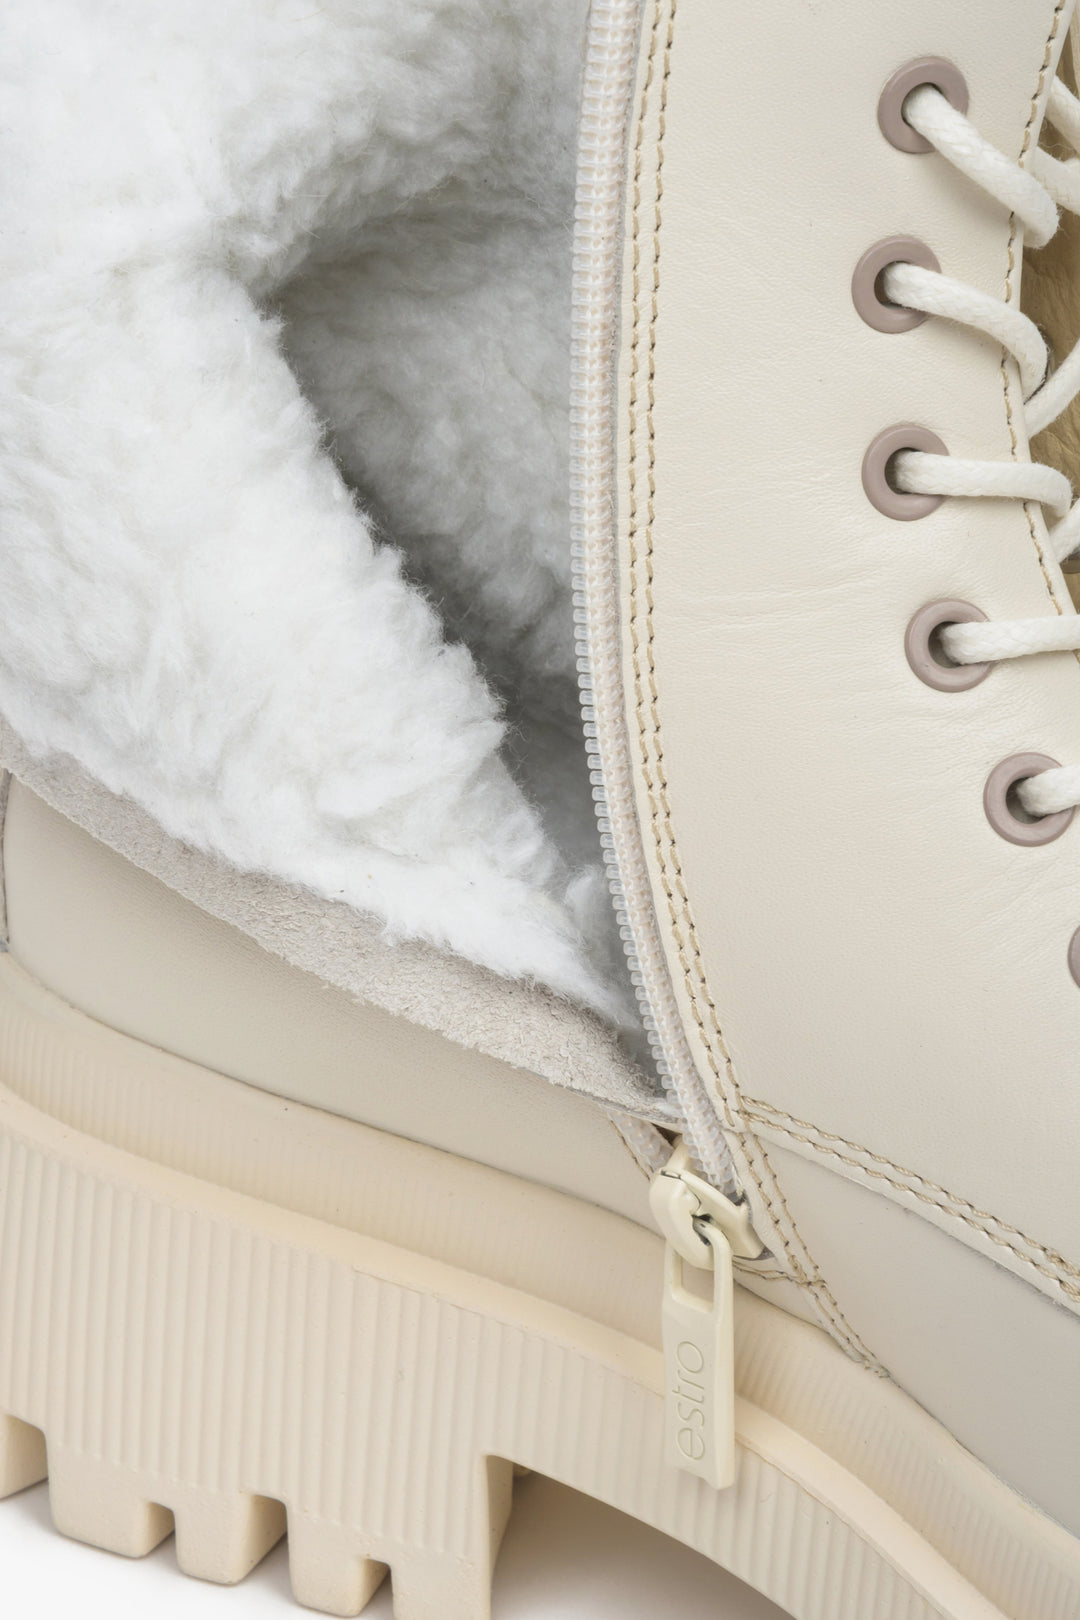 Women's winter boots made of genuine leather in light beige color with lacing and a zipper by Estro - close-up of the shoe filling.